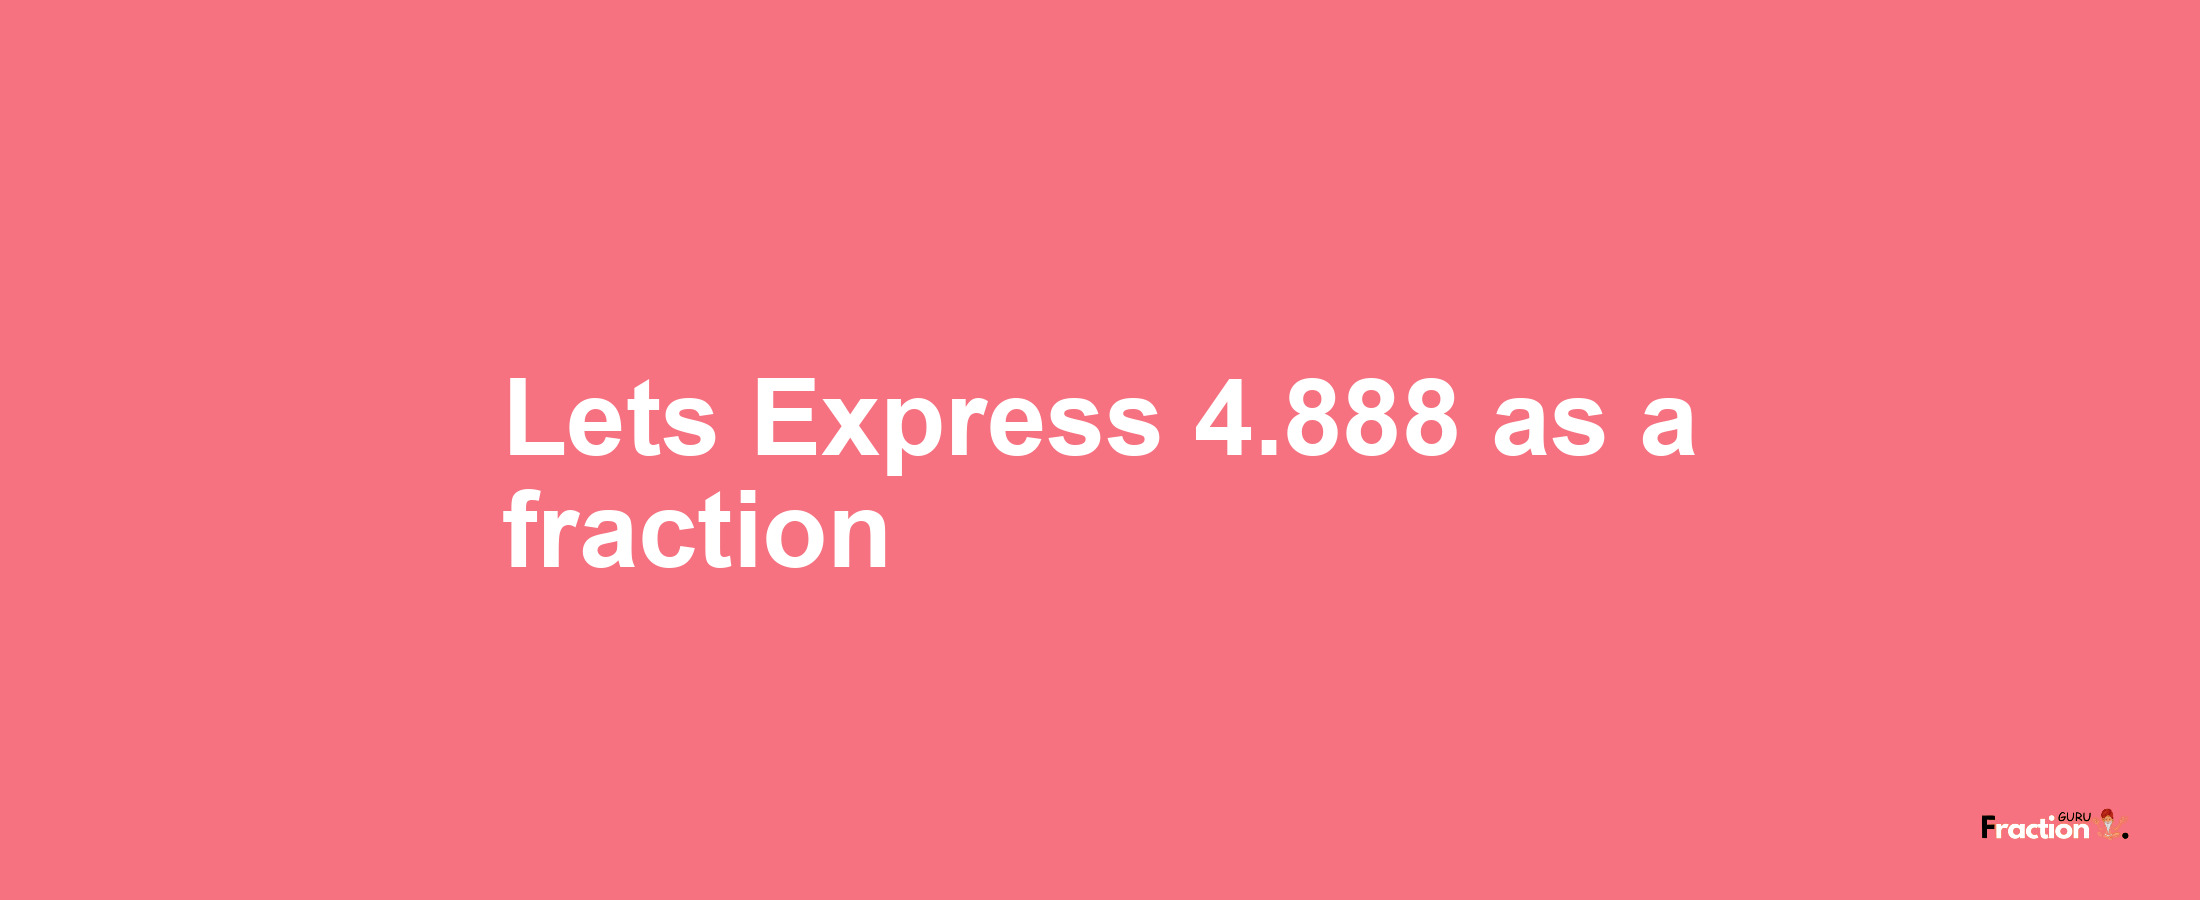 Lets Express 4.888 as afraction